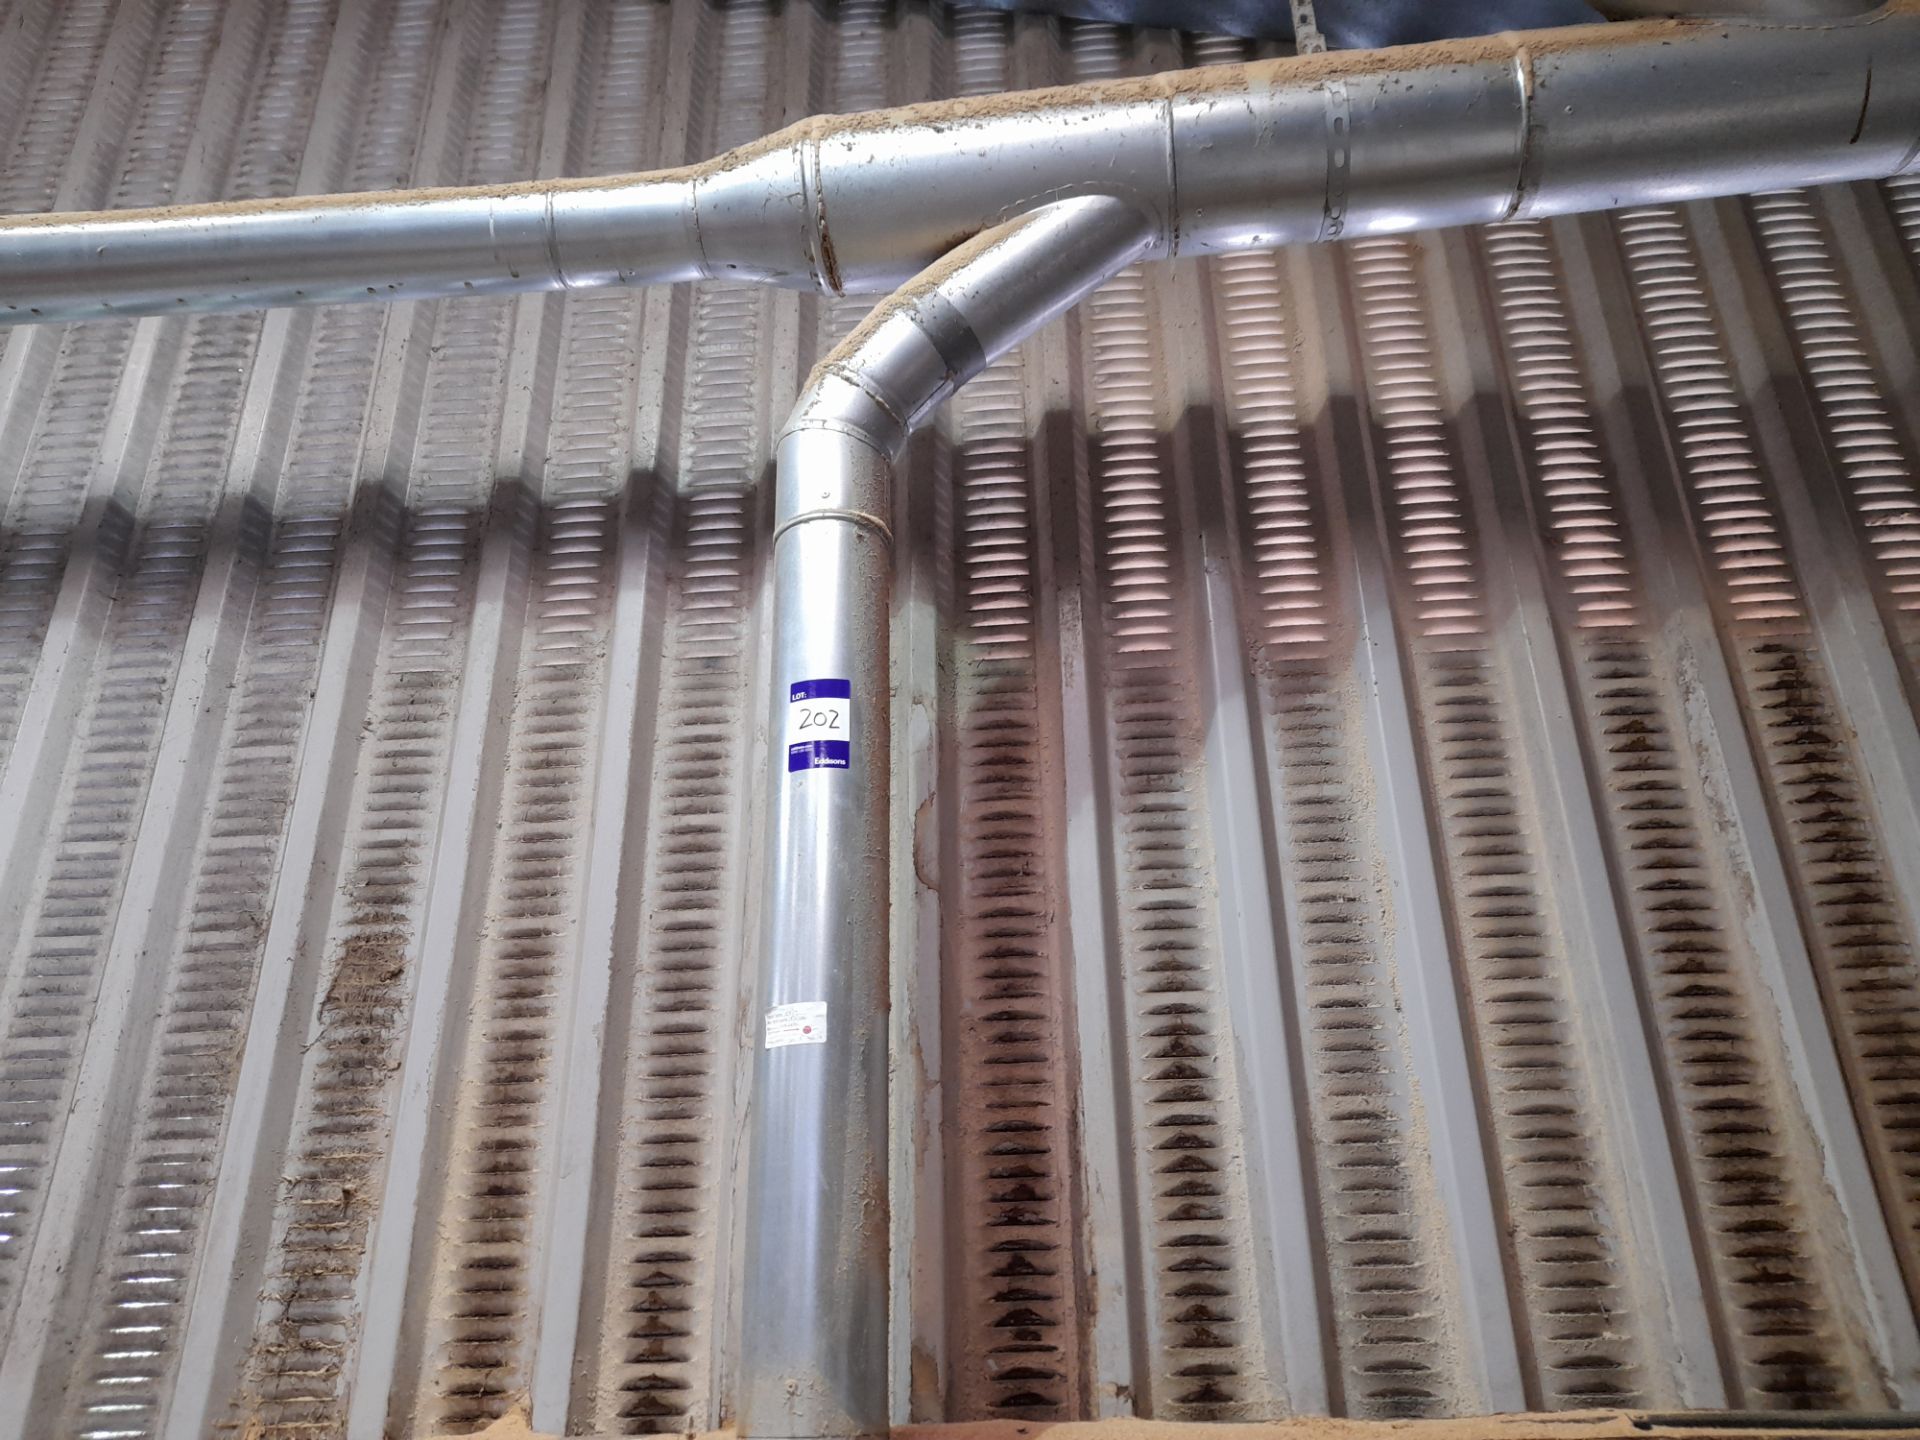 Unbadged 4 bag dust extraction unit, with galvanised steel ducting located to stock shed. *Delayed - Image 6 of 9